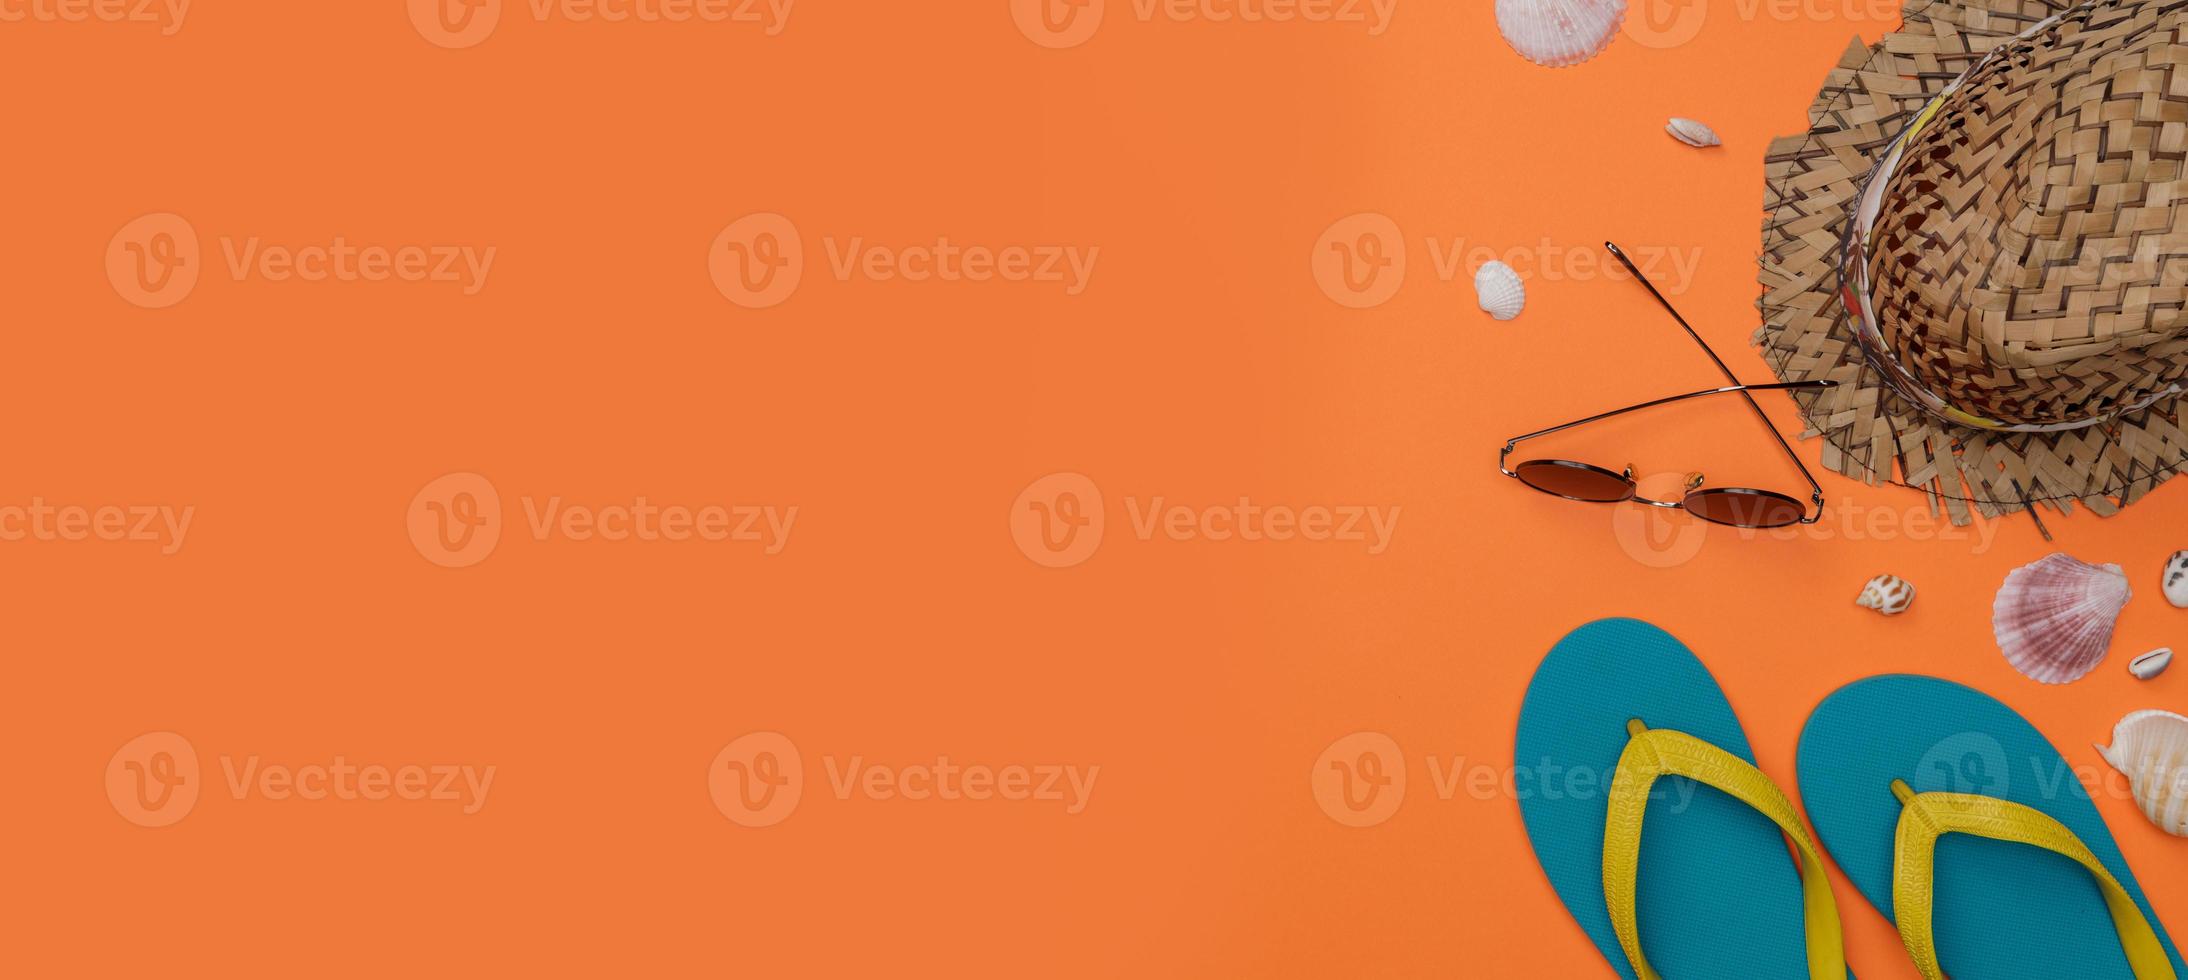 Traveler's accessories with sun glasses, shellfish, slippers, hat, long banner isolated orange background, Overhead view with copy space, Tropical travel concept photo